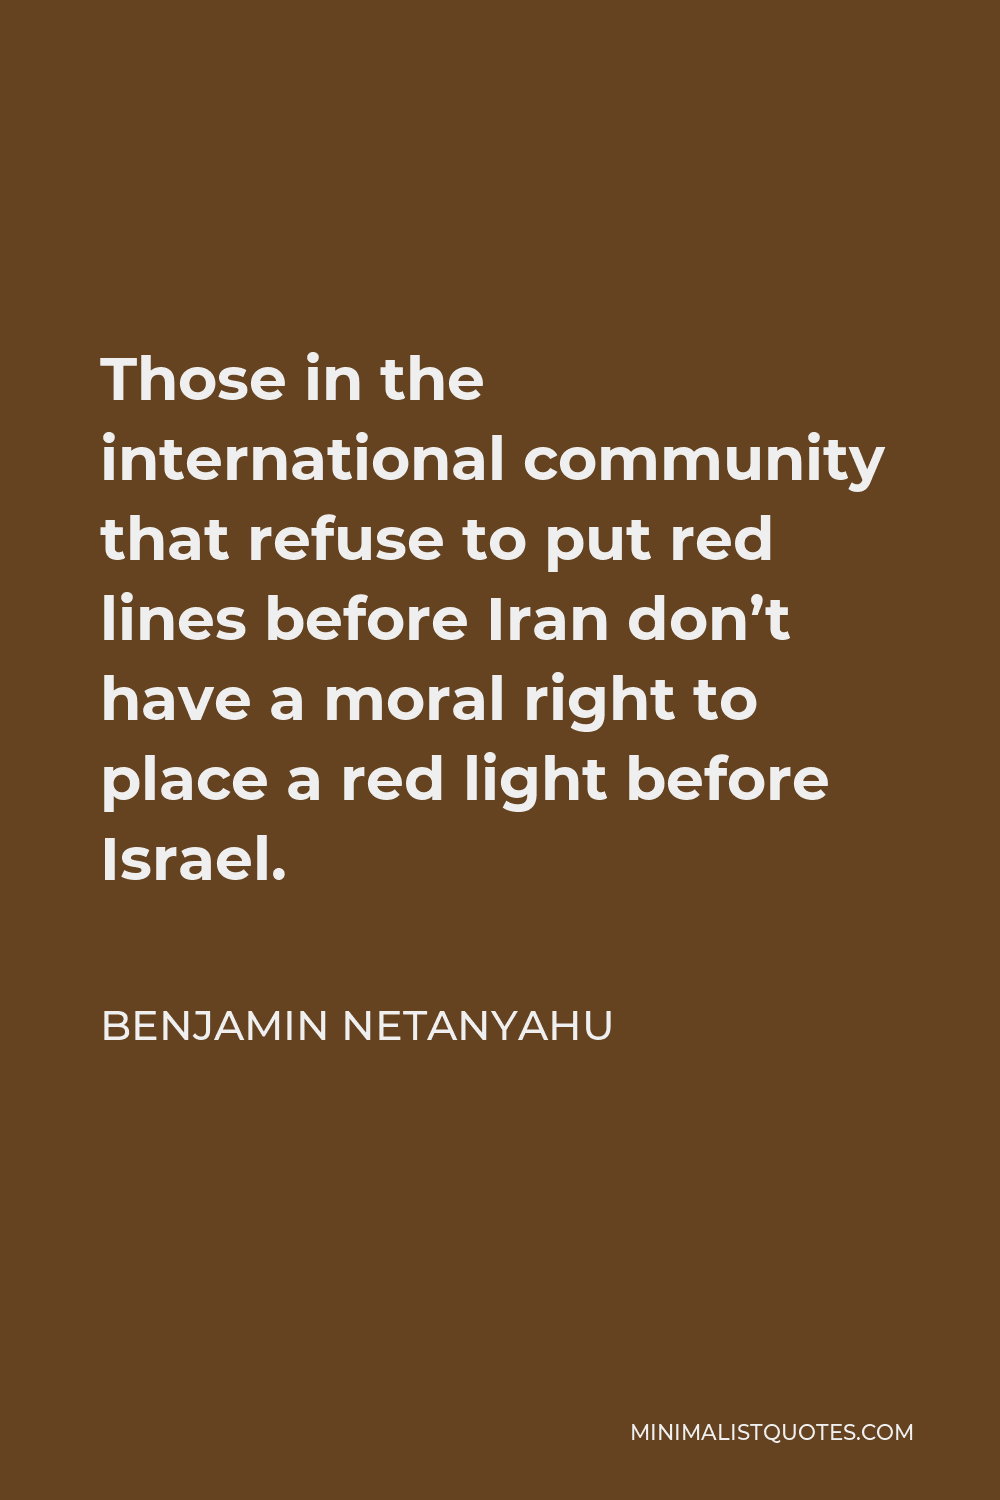 Benjamin Netanyahu Quote - Those in the international community that refuse to put red lines before Iran don’t have a moral right to place a red light before Israel.